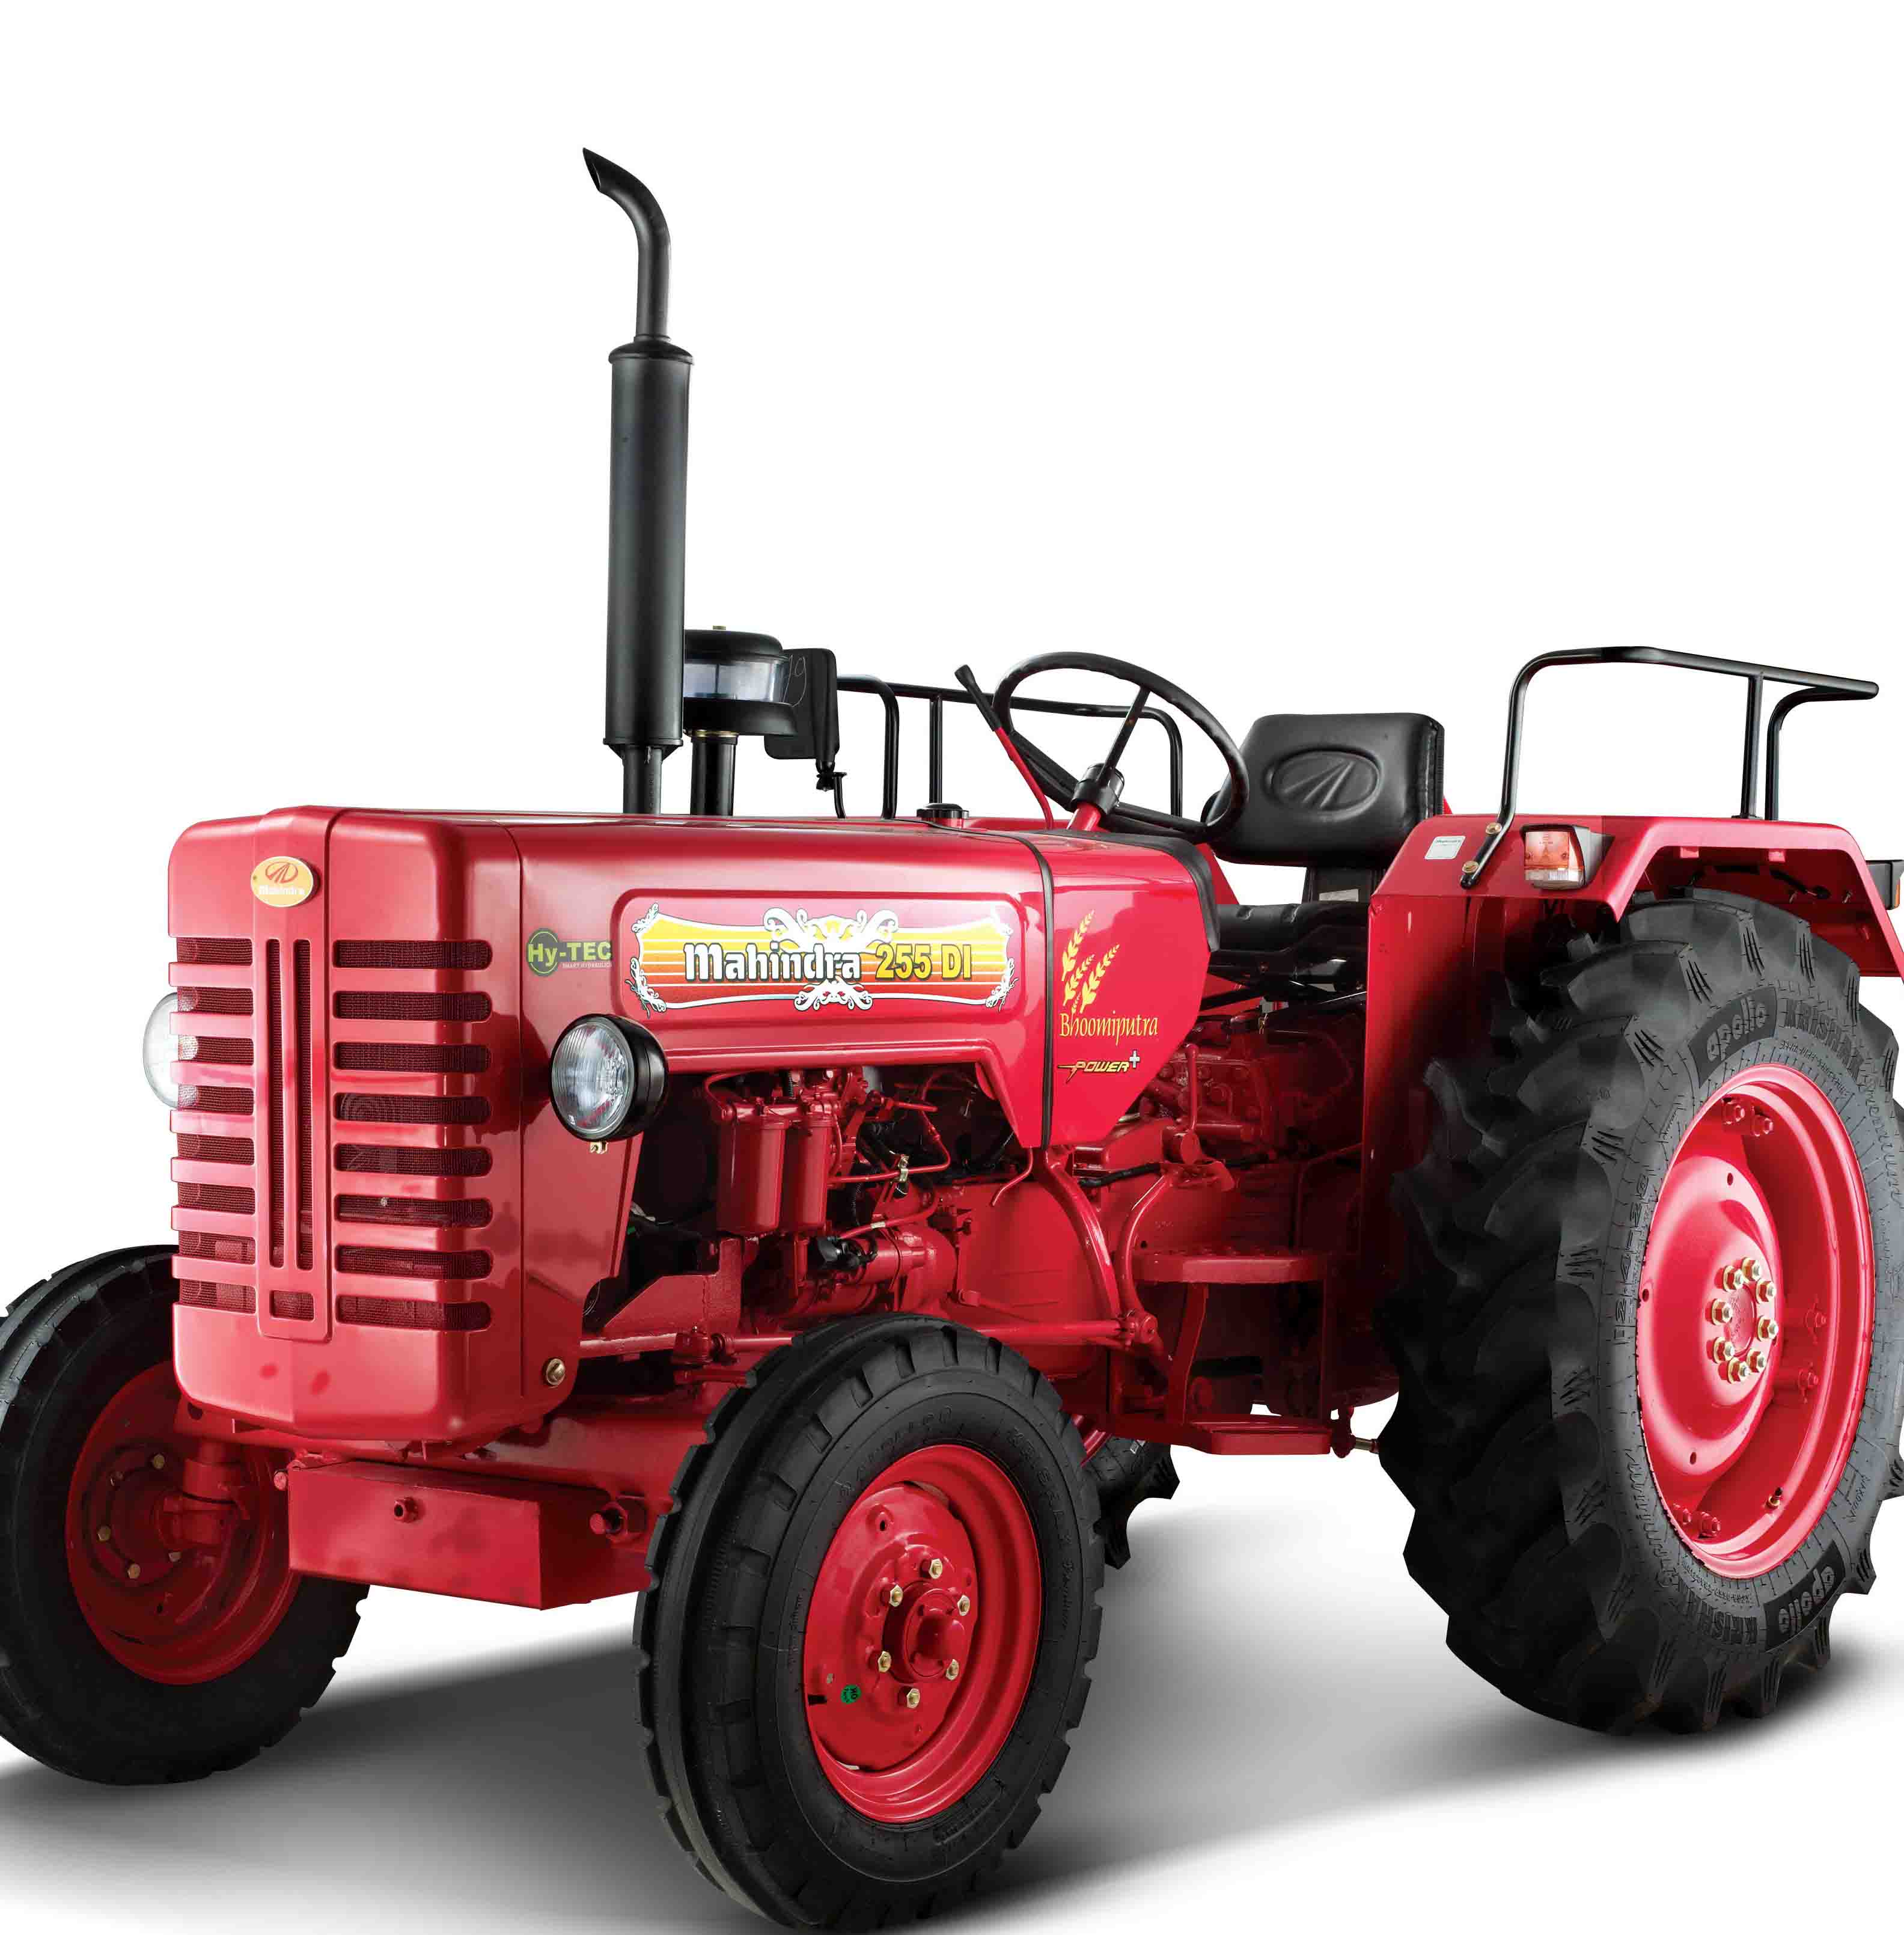 Mahindra Tractors Price List In India Of All Models (2018)